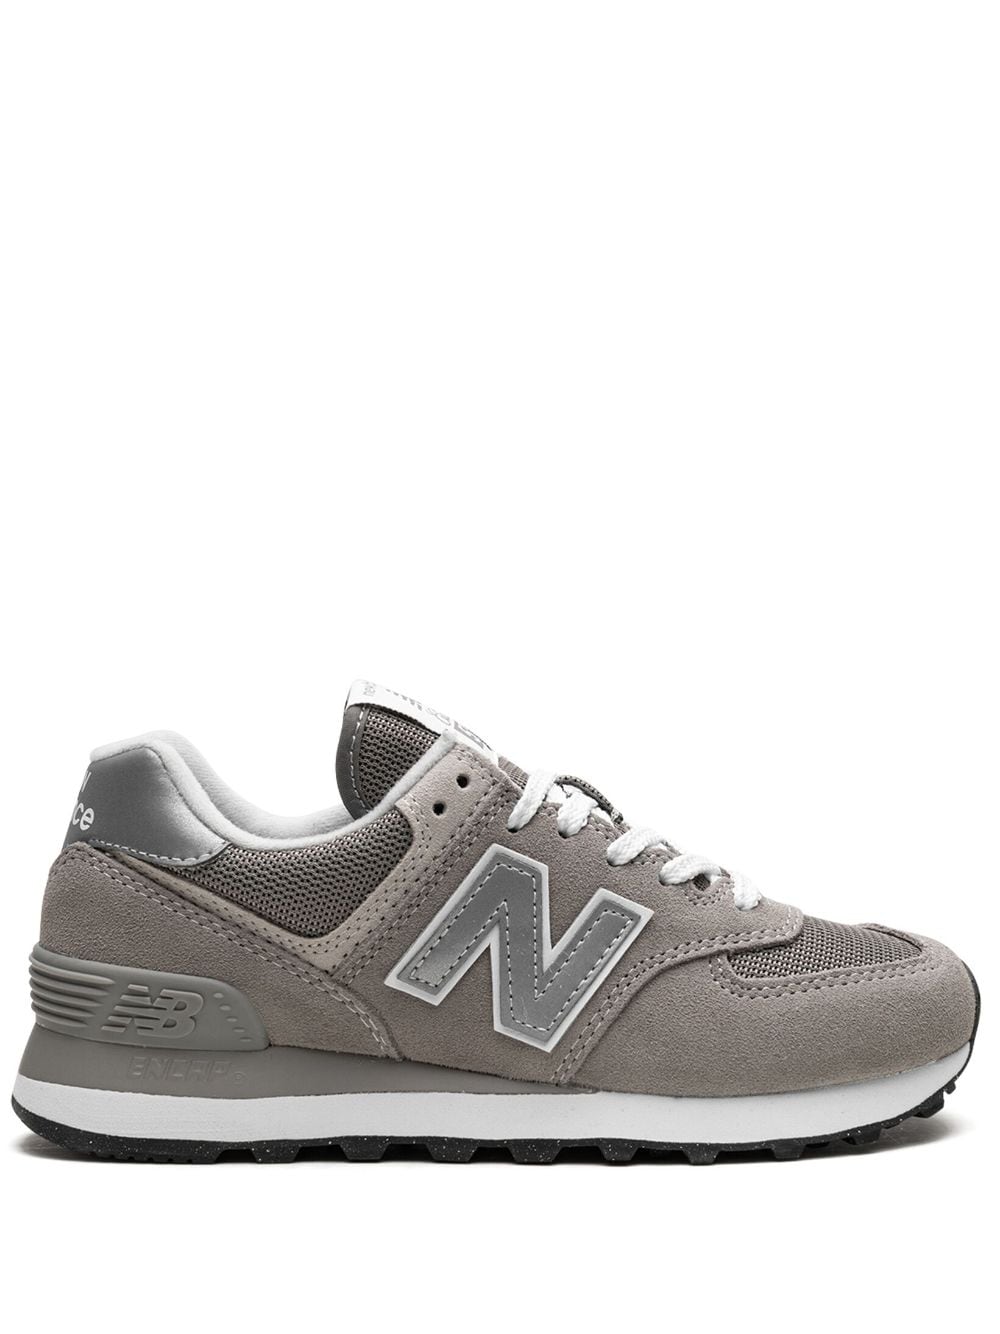 New Balance 574 Core low-top sneakers - Grey